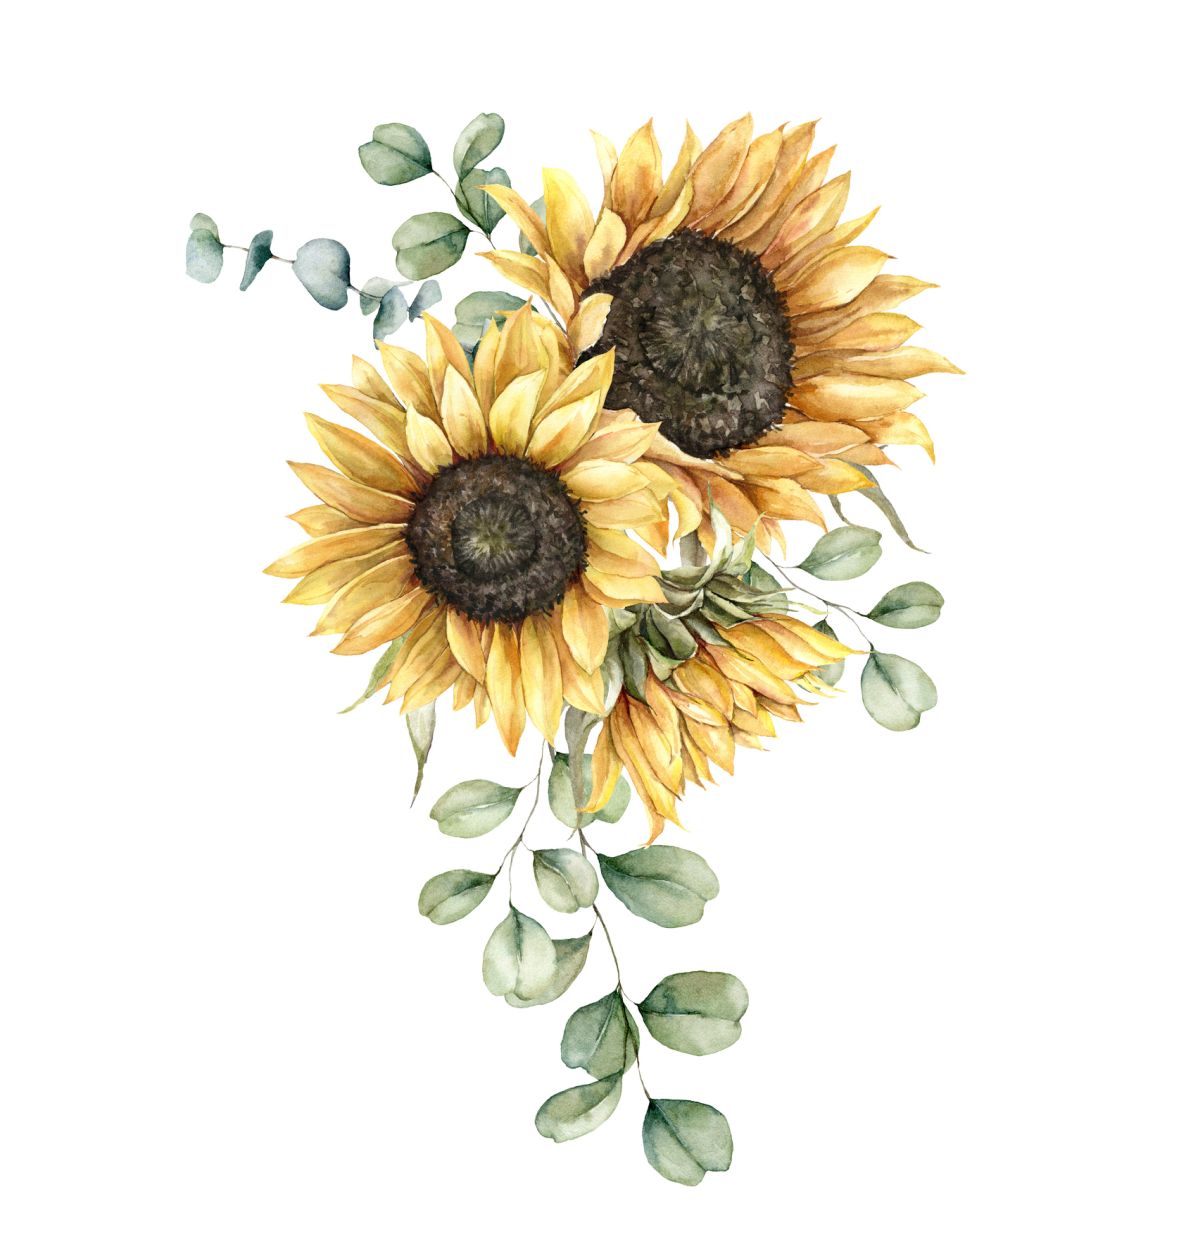 How To Draw a Sunflower